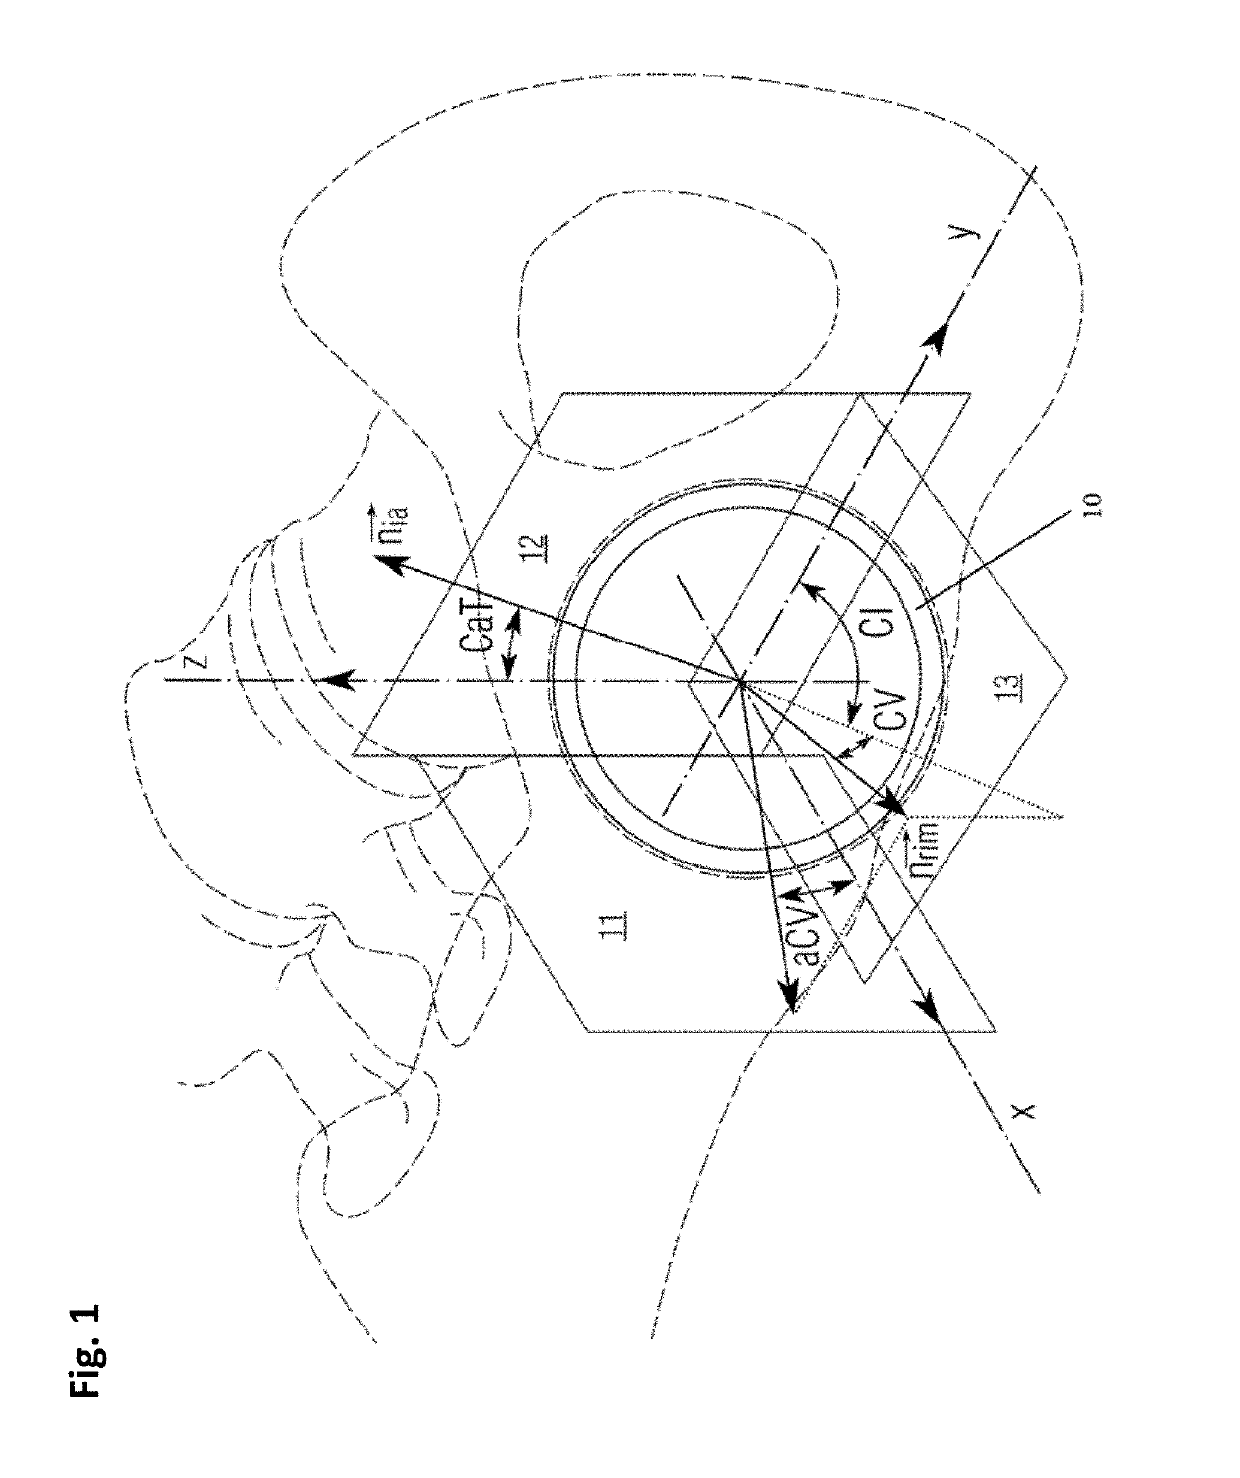 Fluoroscopy-Based Measurement and Processing System and Method